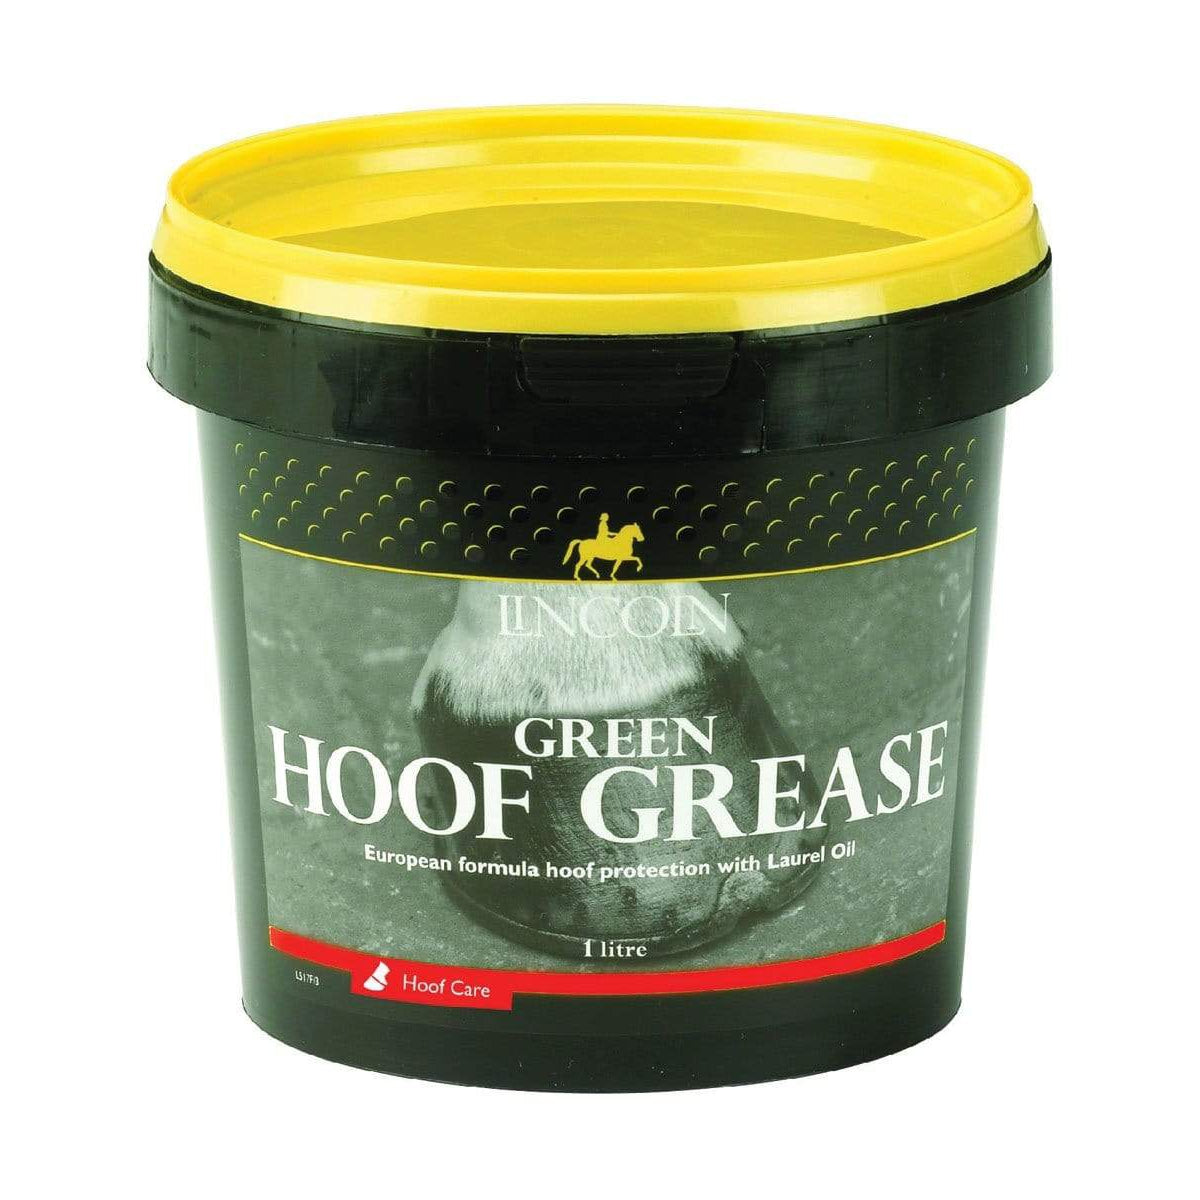 Lincoln Green Hoof Grease - 1 litre